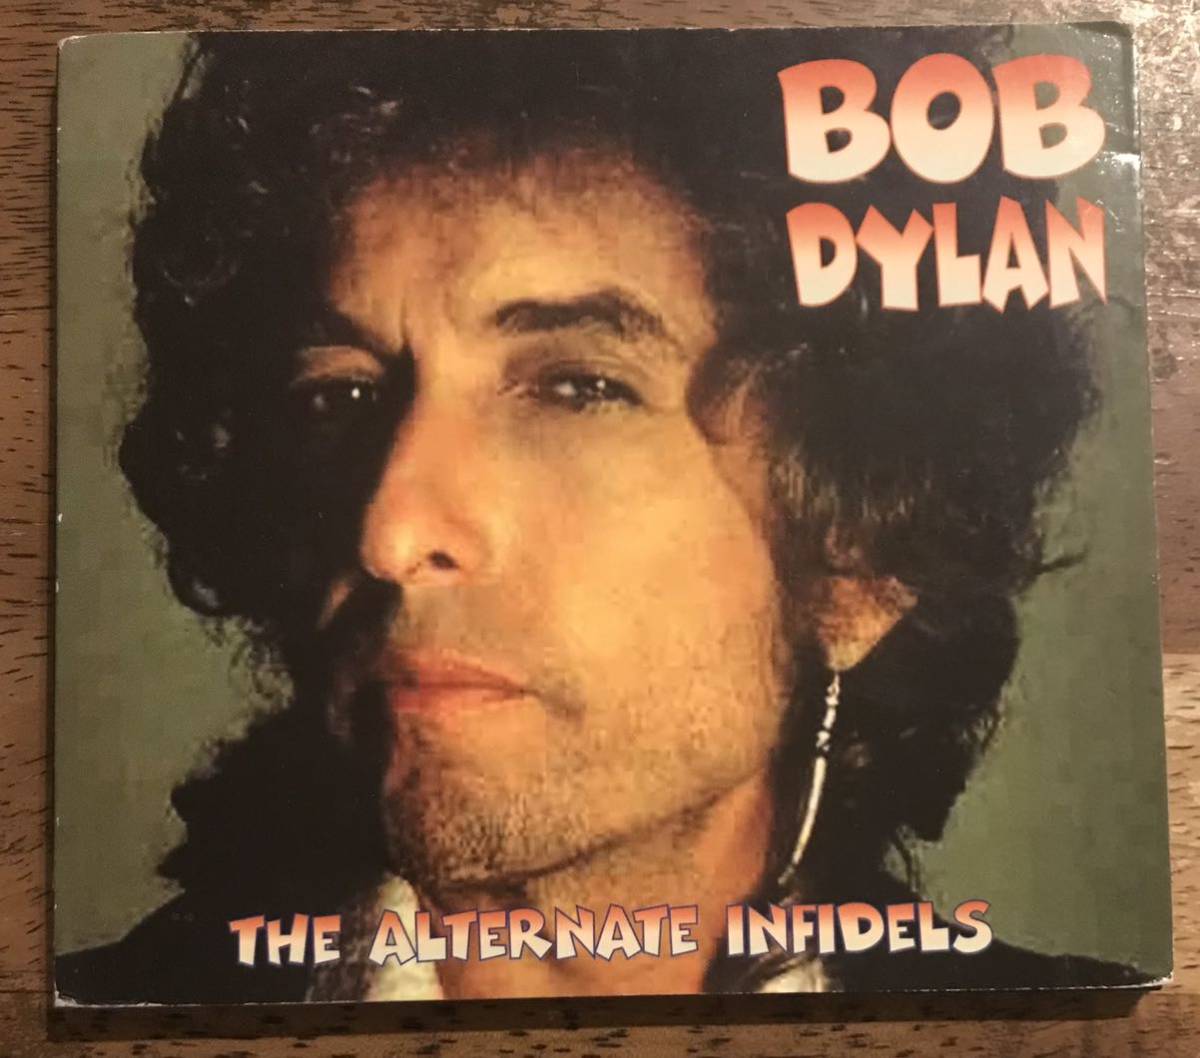 Bob Dylan / The Alternate Infidels / 1CD / Pressed CD / The Alternate Infidels + The Infidels Sessions / Recorded at The Power Sta_画像1